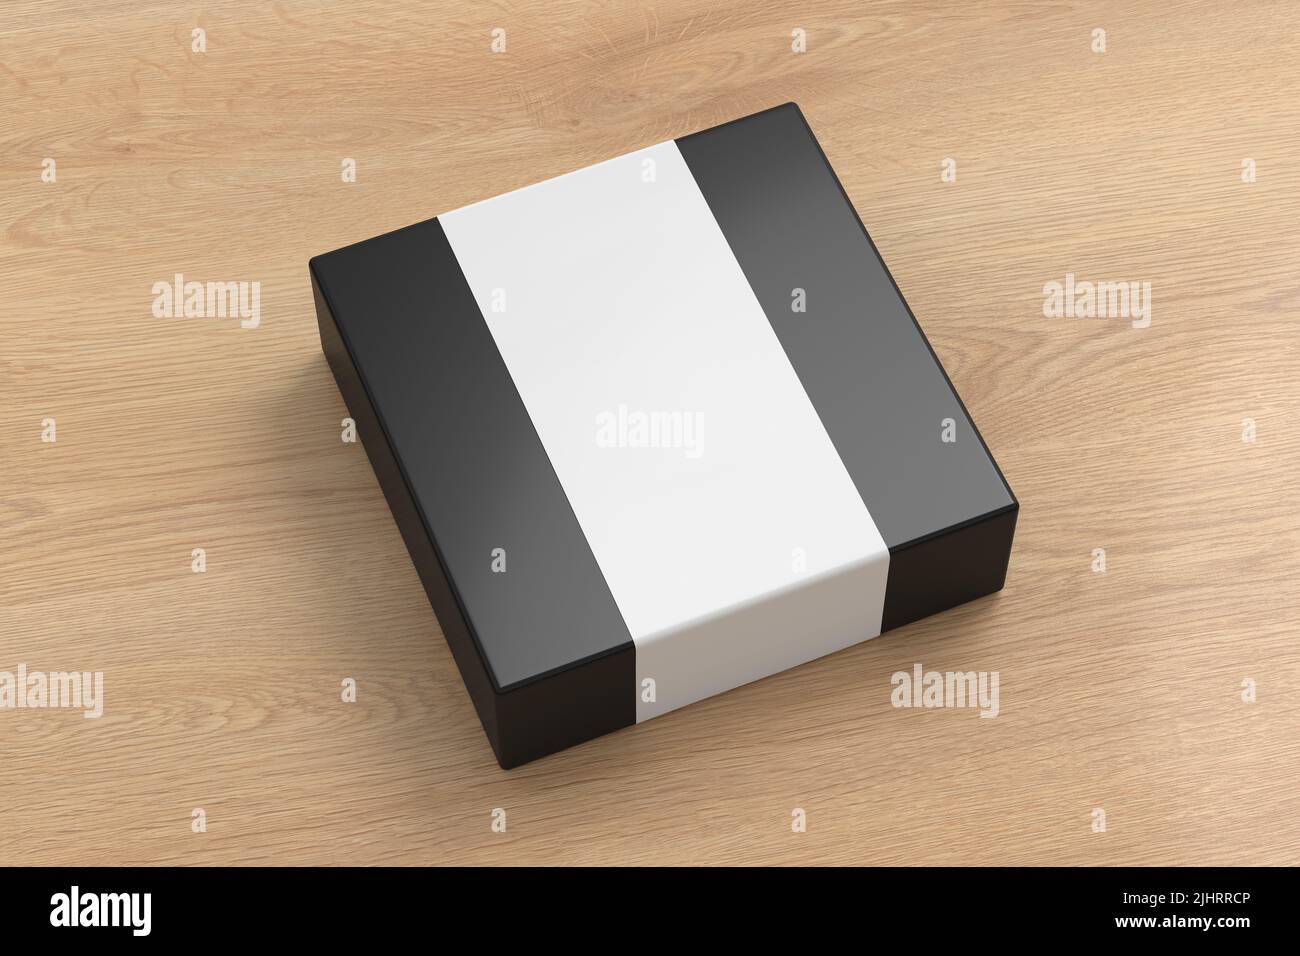 Square box mock up with blank paper cover label: Black gift box on wooden background. Side view. 3d illustration Stock Photo